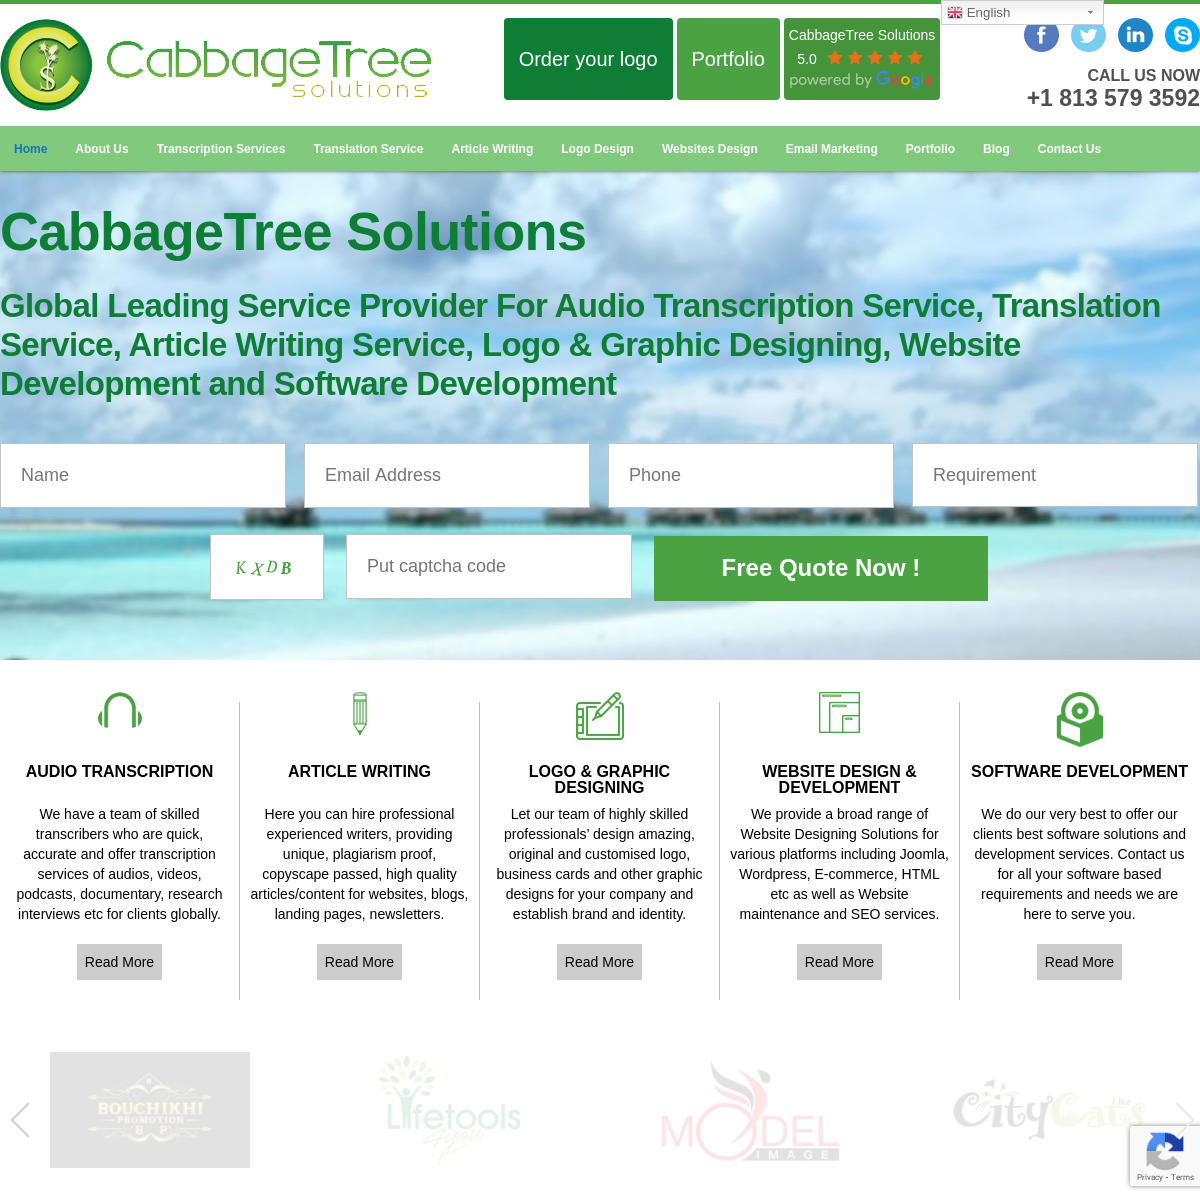 A complete backup of cabbagetreesolutions.com